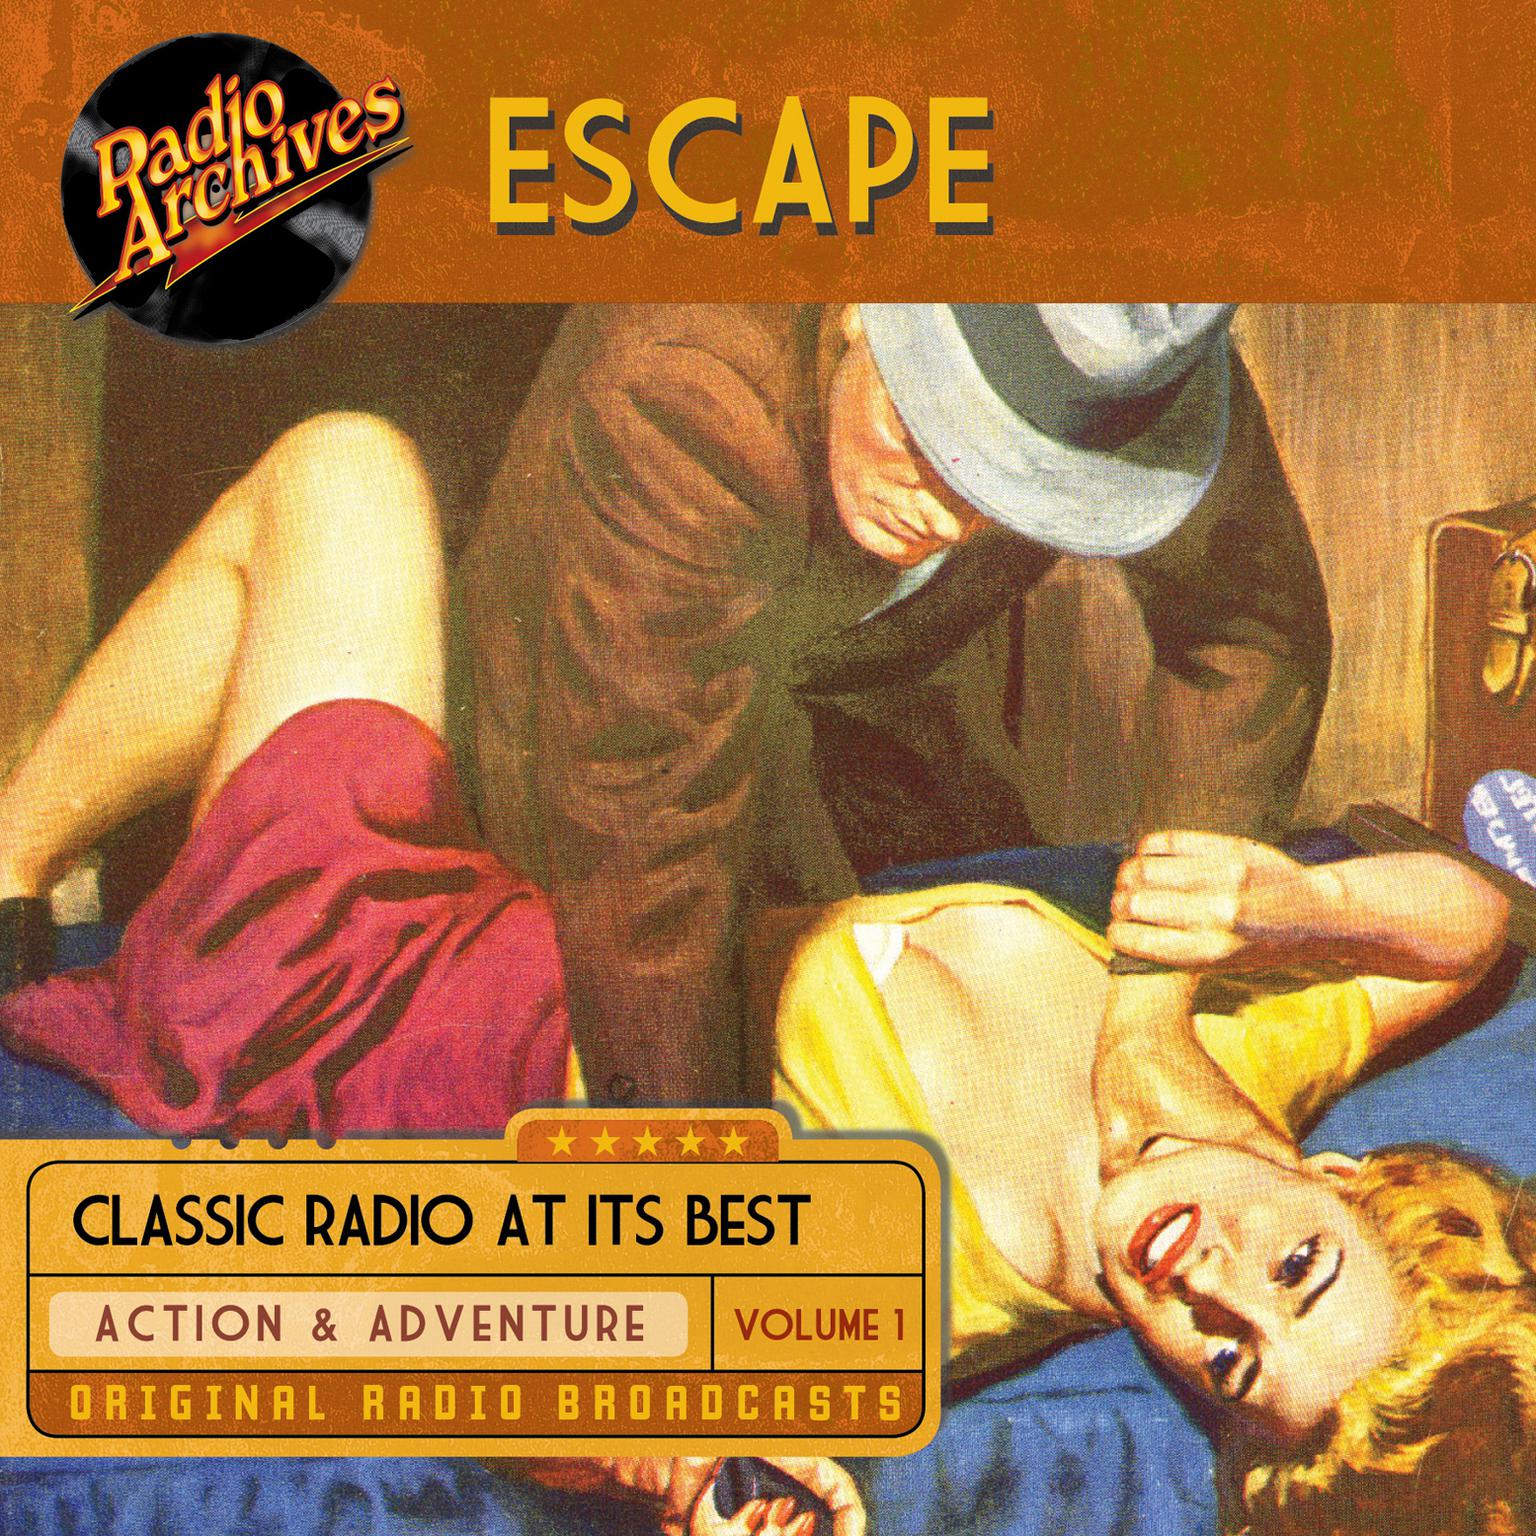 Escape, Volume 1 Audiobook, by Hollywood 360